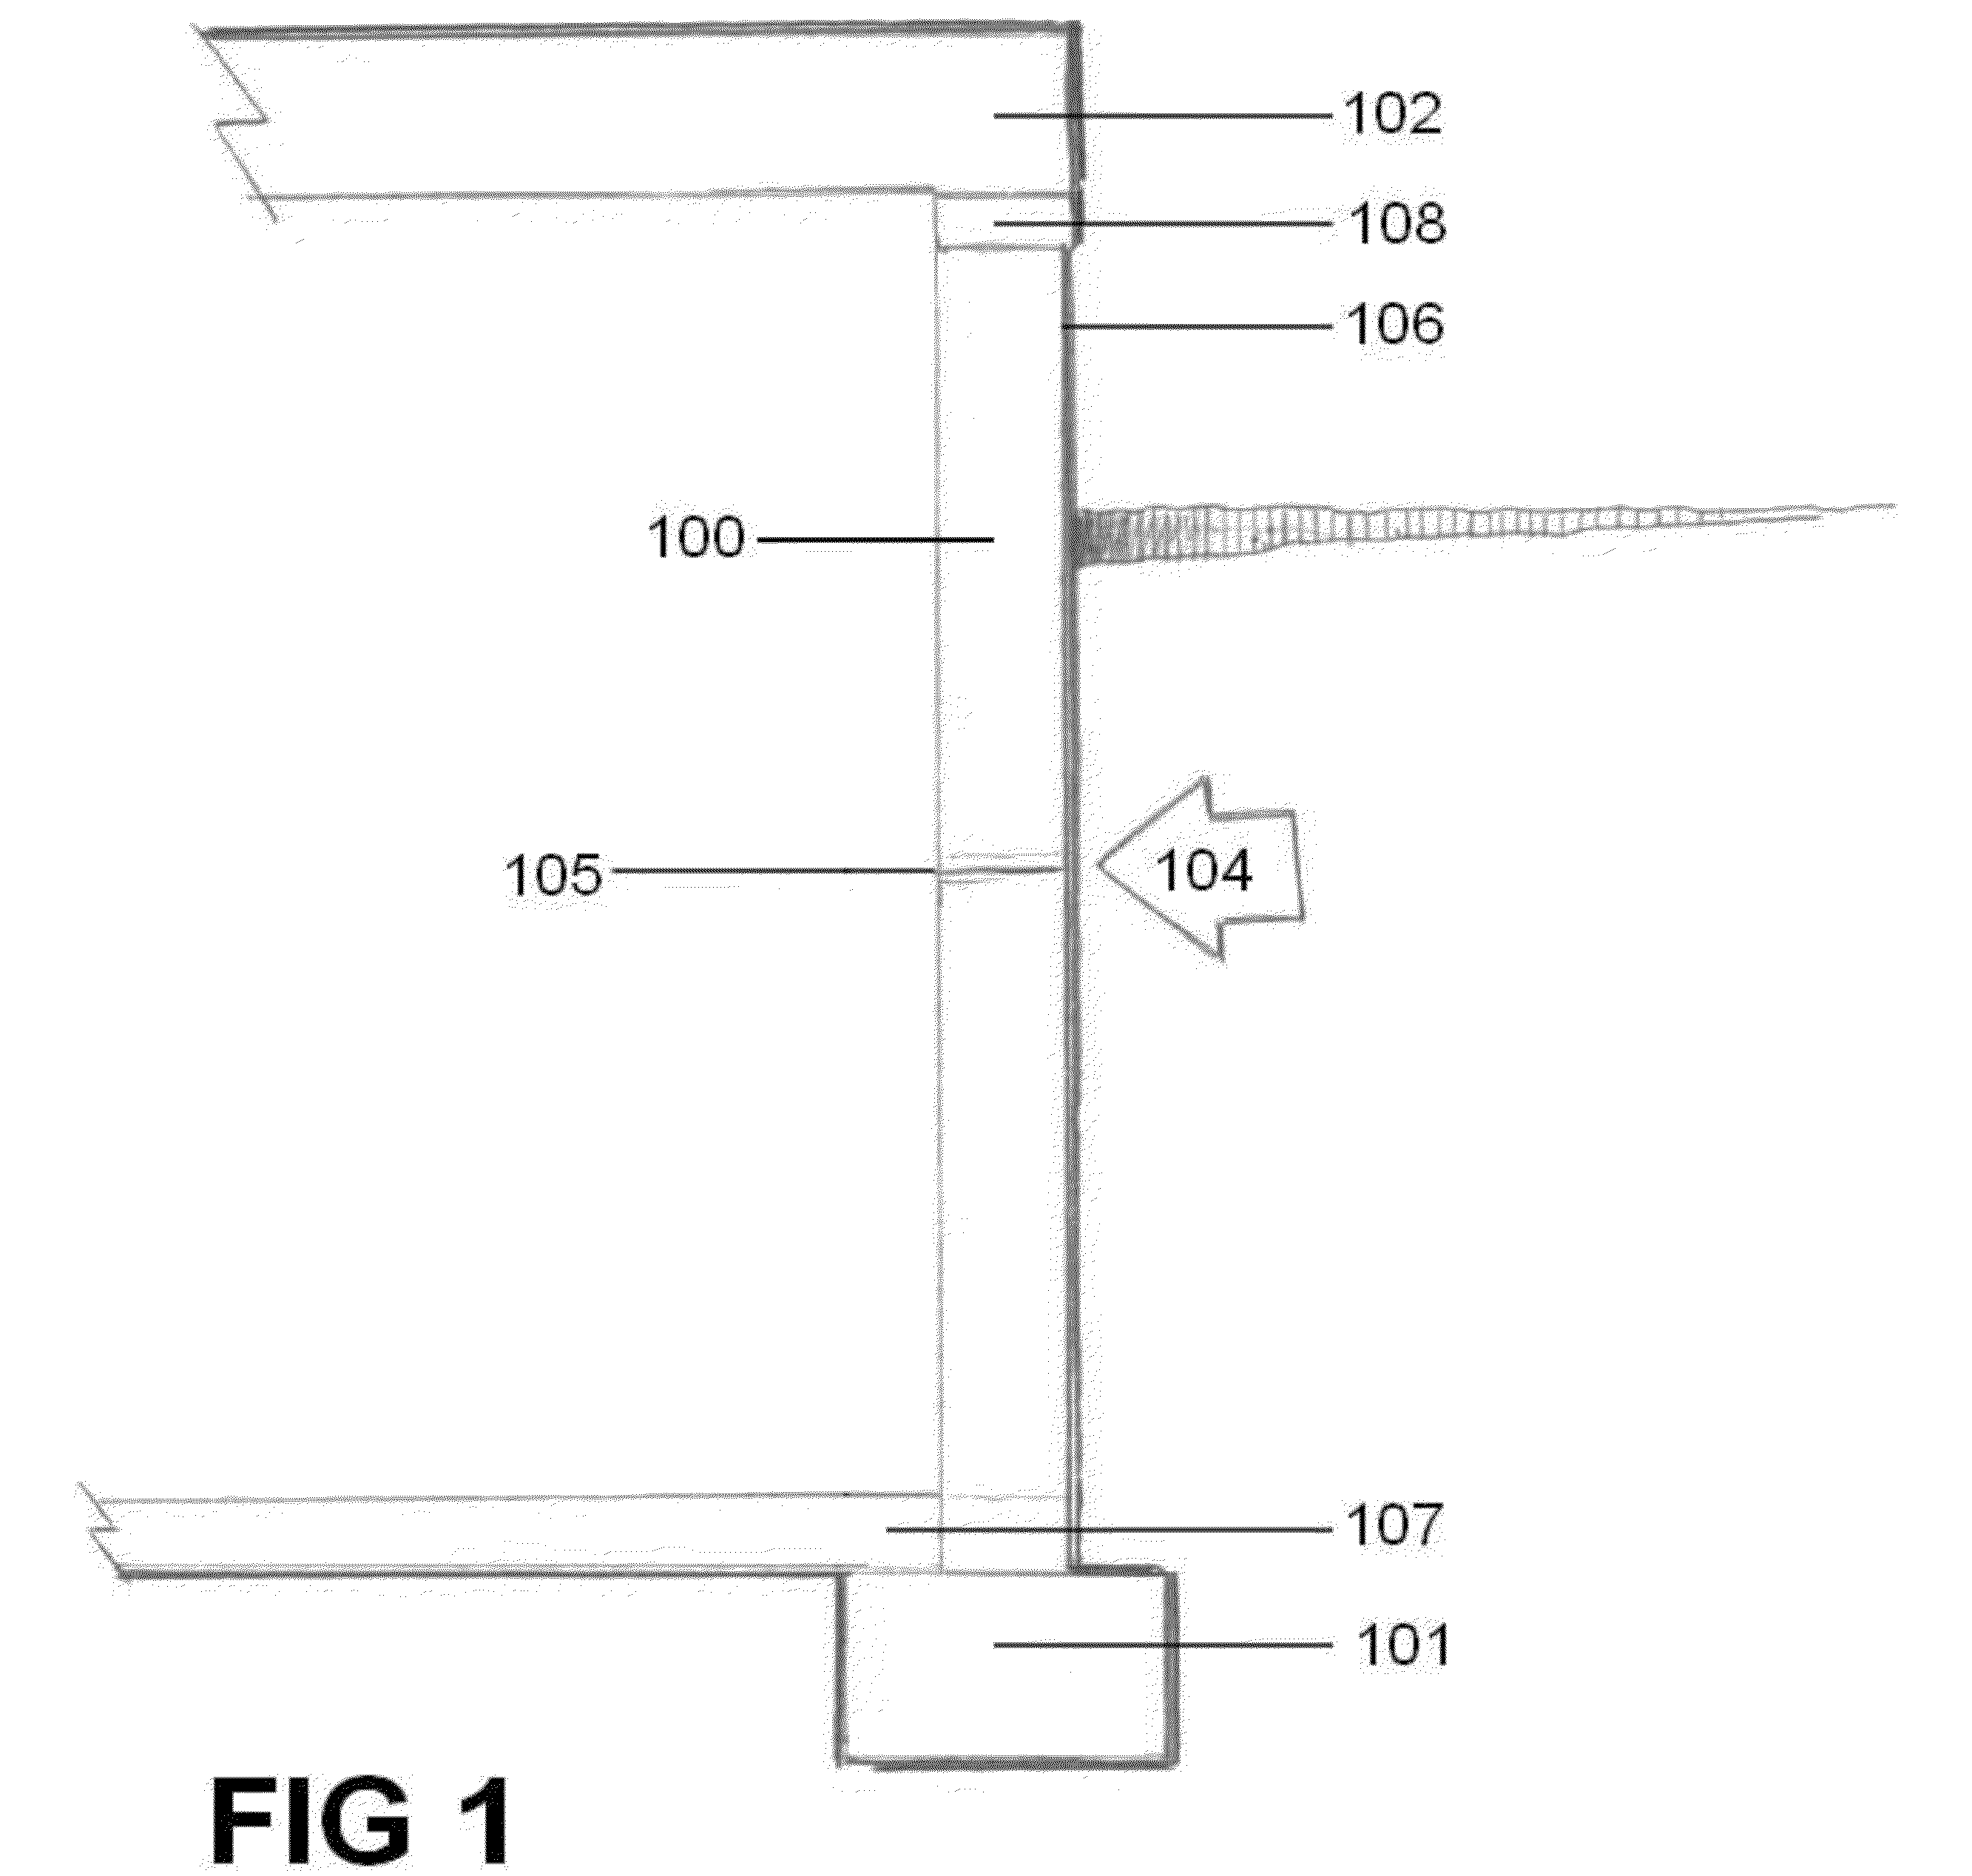 Carbon fiber wall reinforcement system and a method for its use